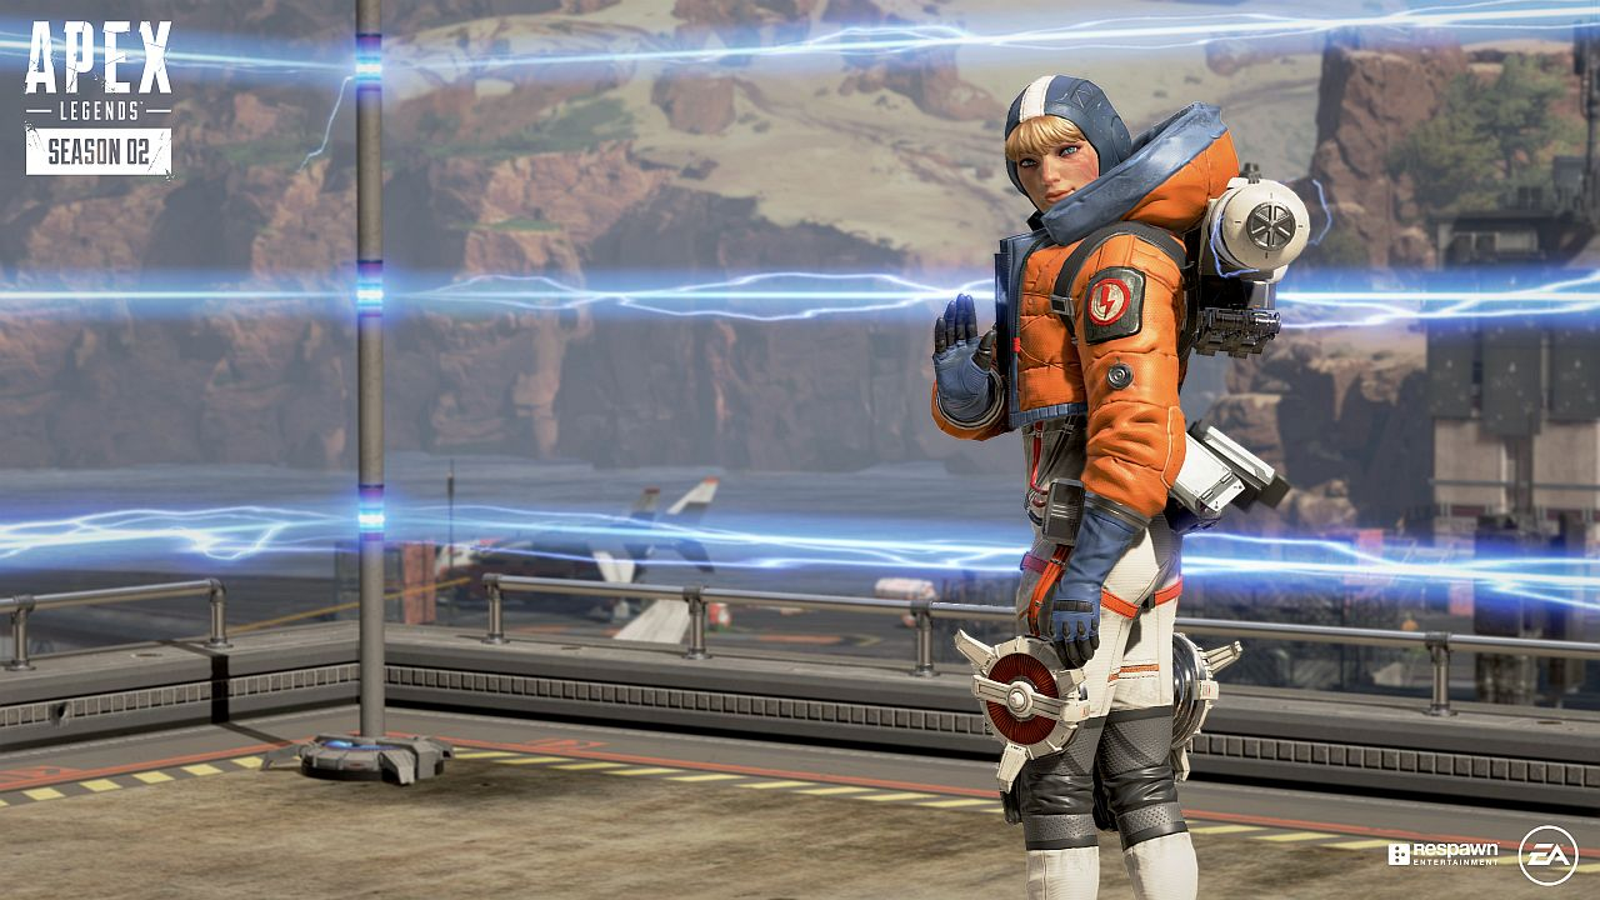 Apex Legends Review: One of the genre's finest